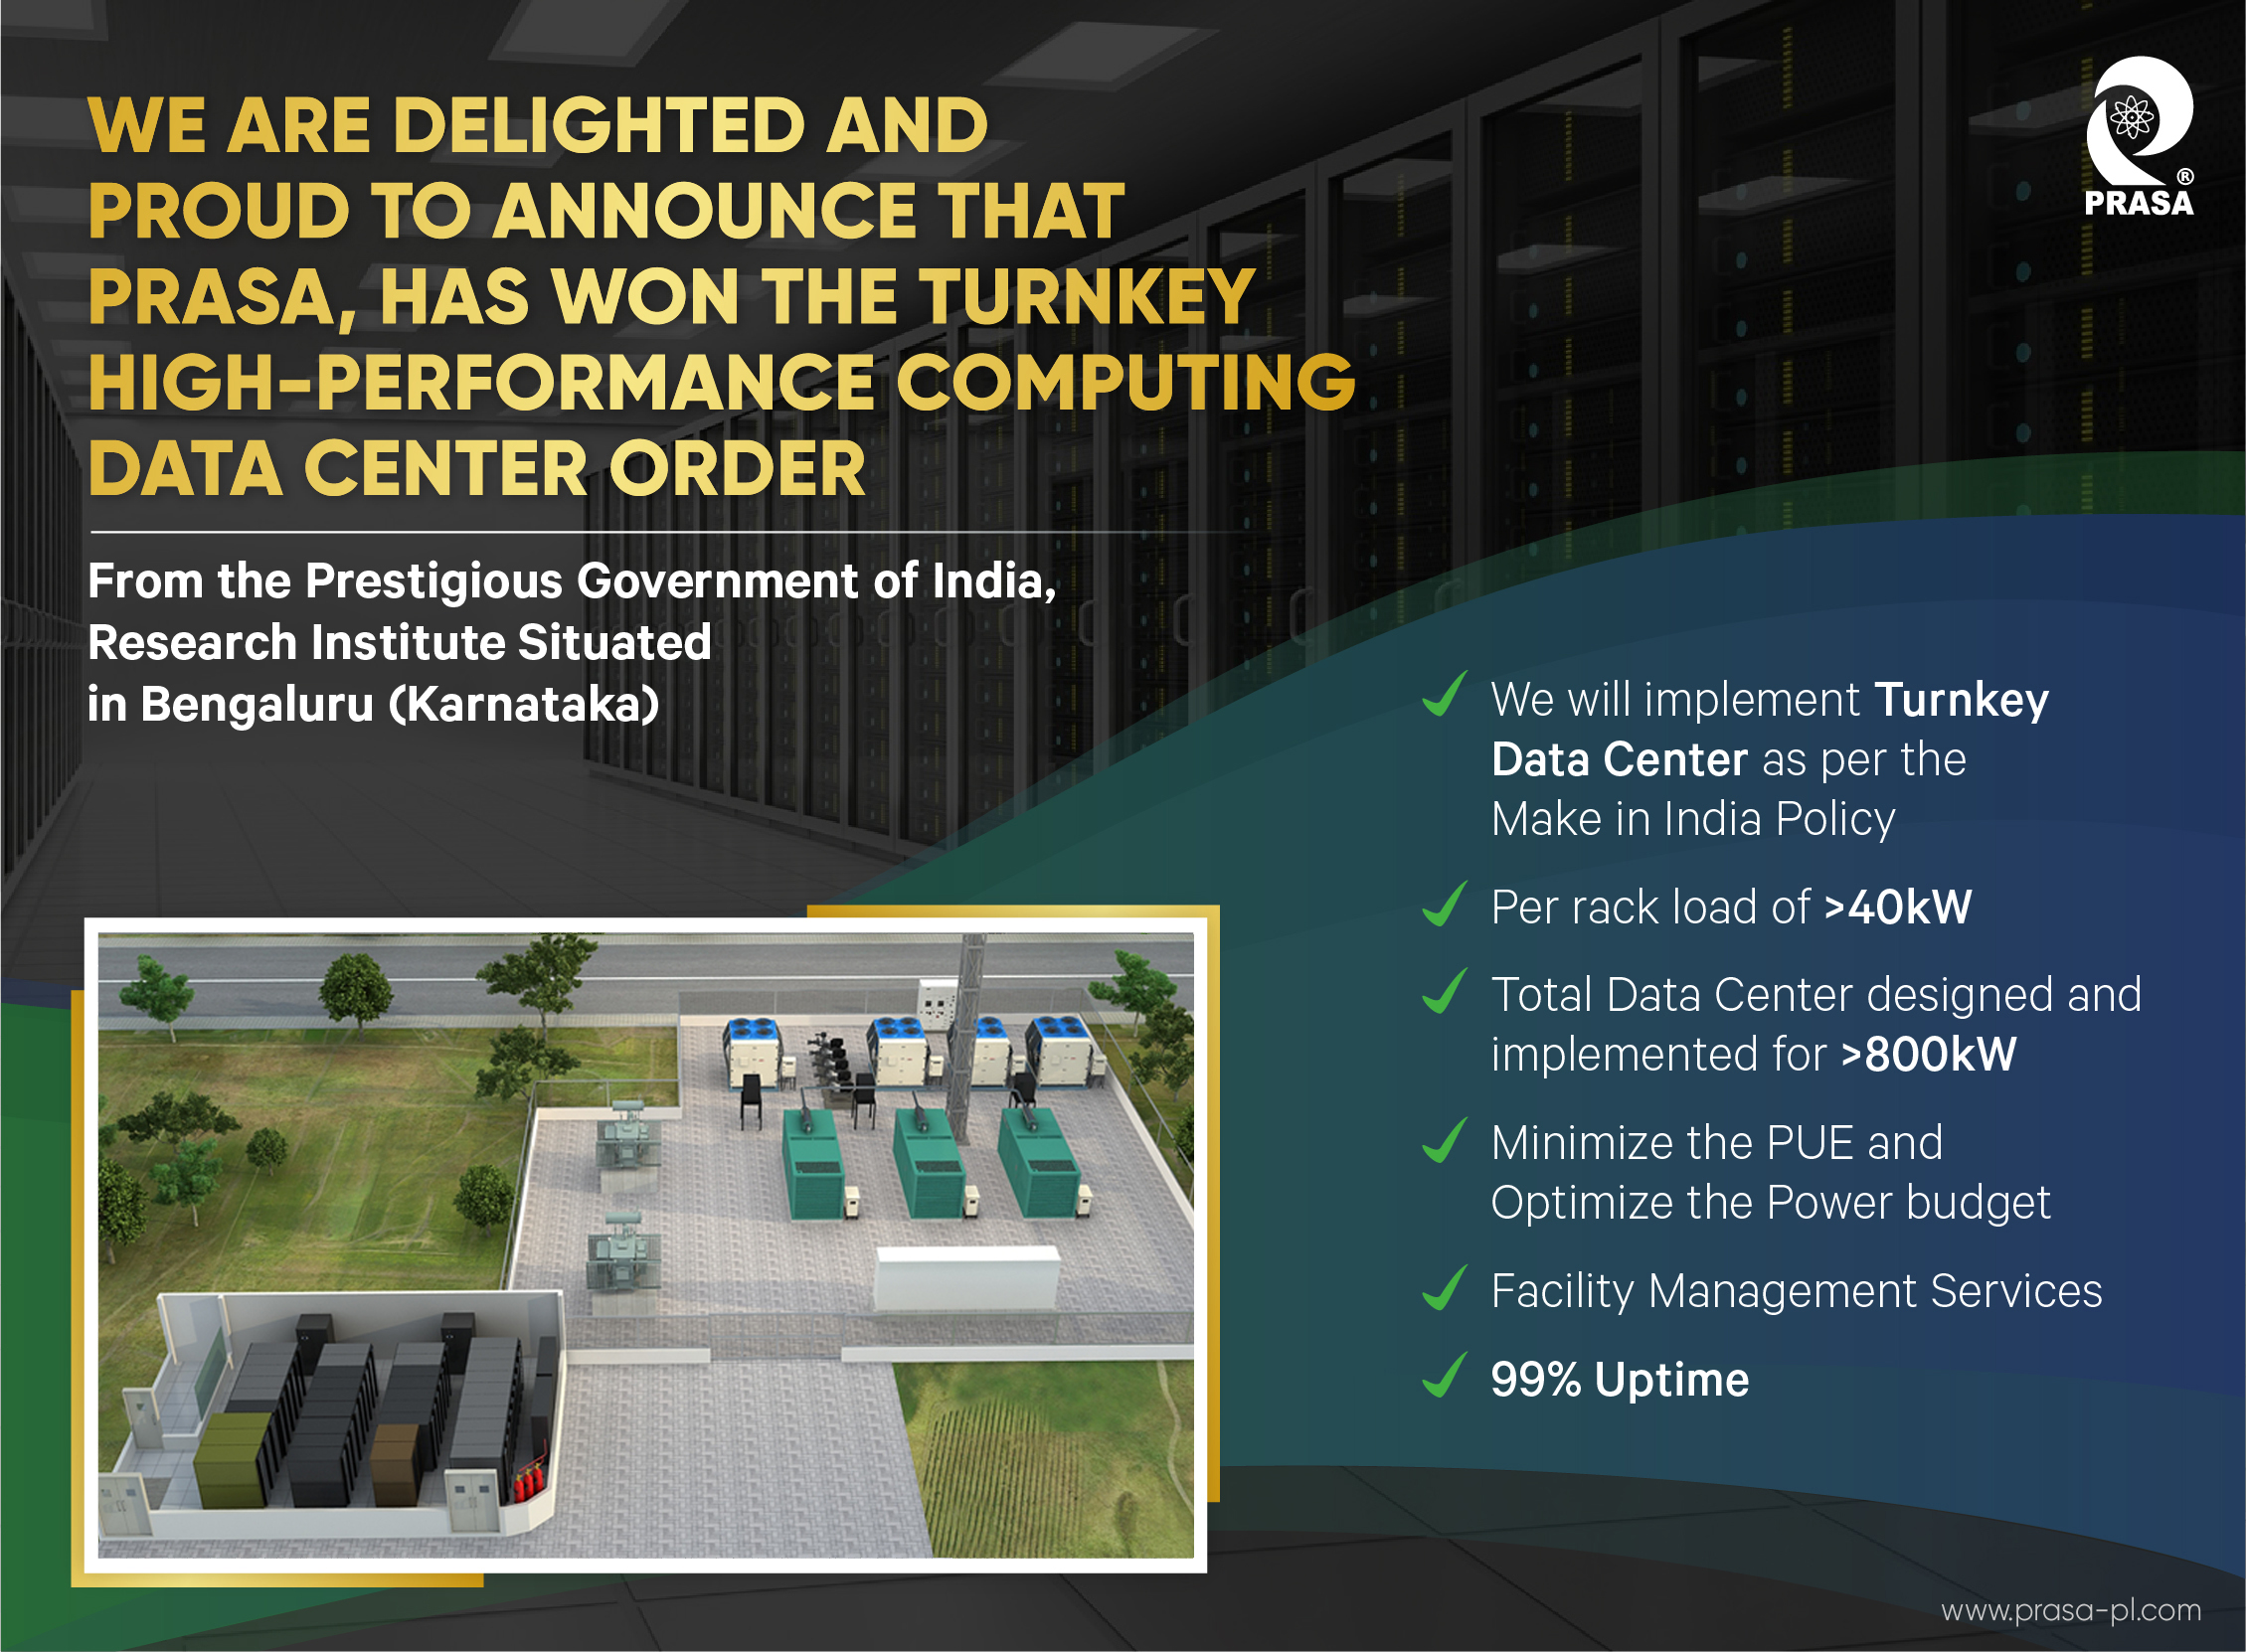 Prasa has won the Turnkey High-Performance Computing Data Center Order From the Prestigious Government of India, Research Institute Situated in Bengaluru (Karnataka)